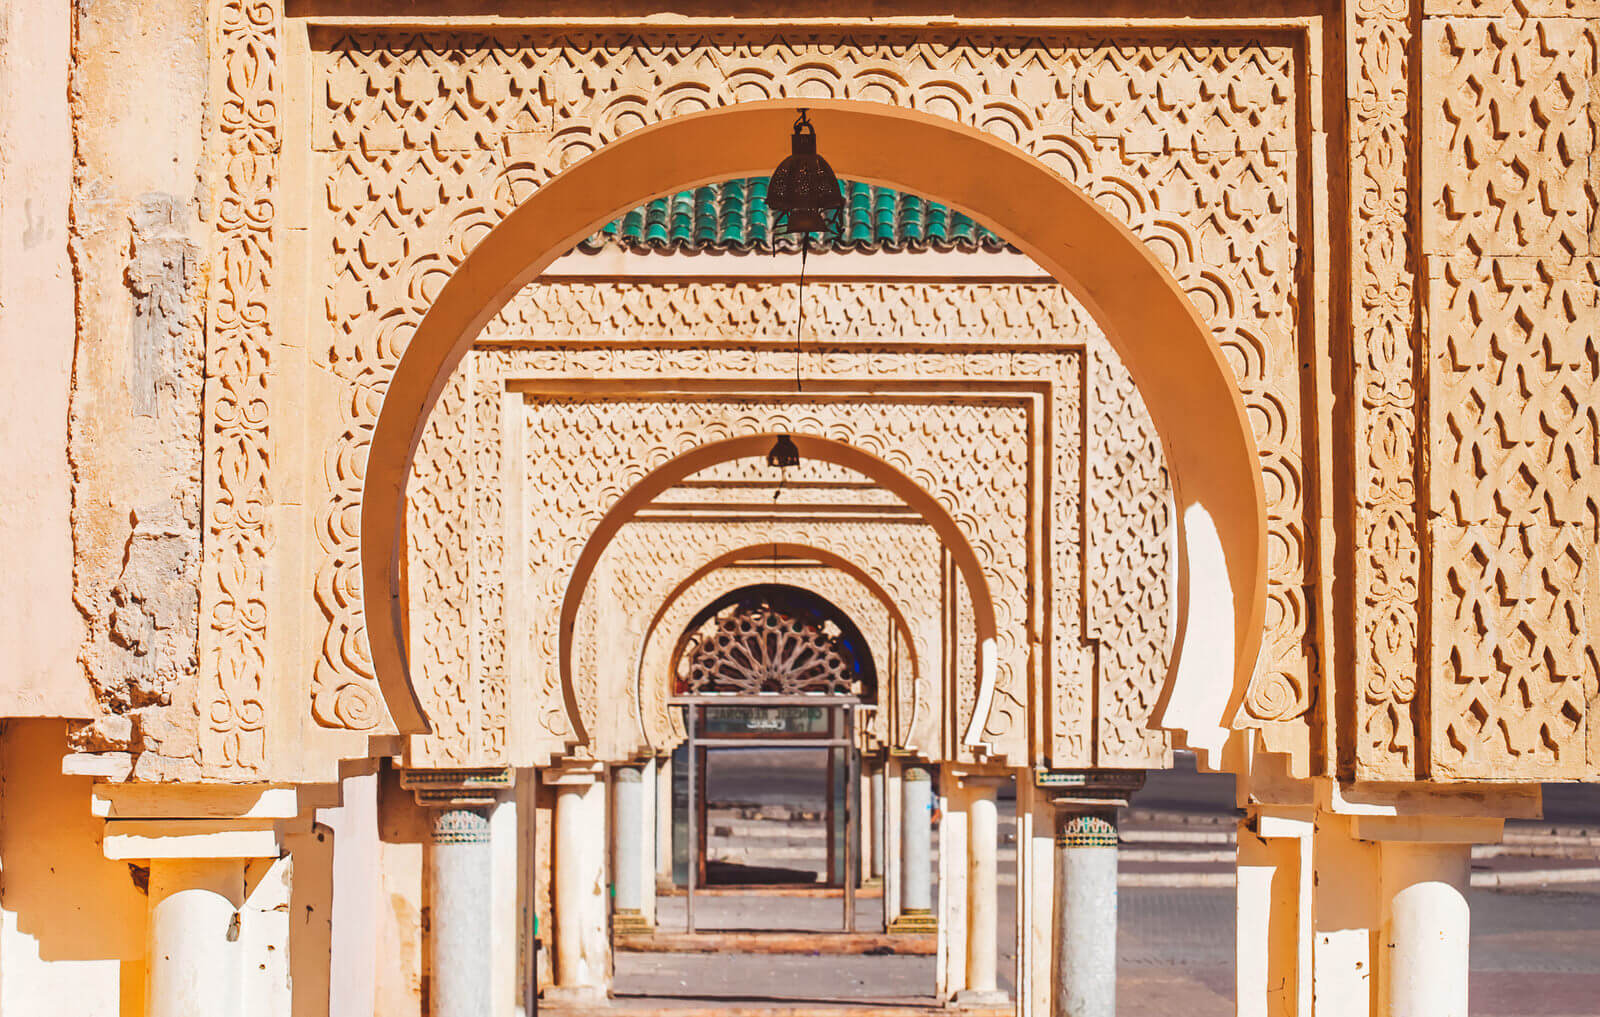 Discover the rich cultural heritage and vibrant atmosphere of this iconic Moroccan landmark.